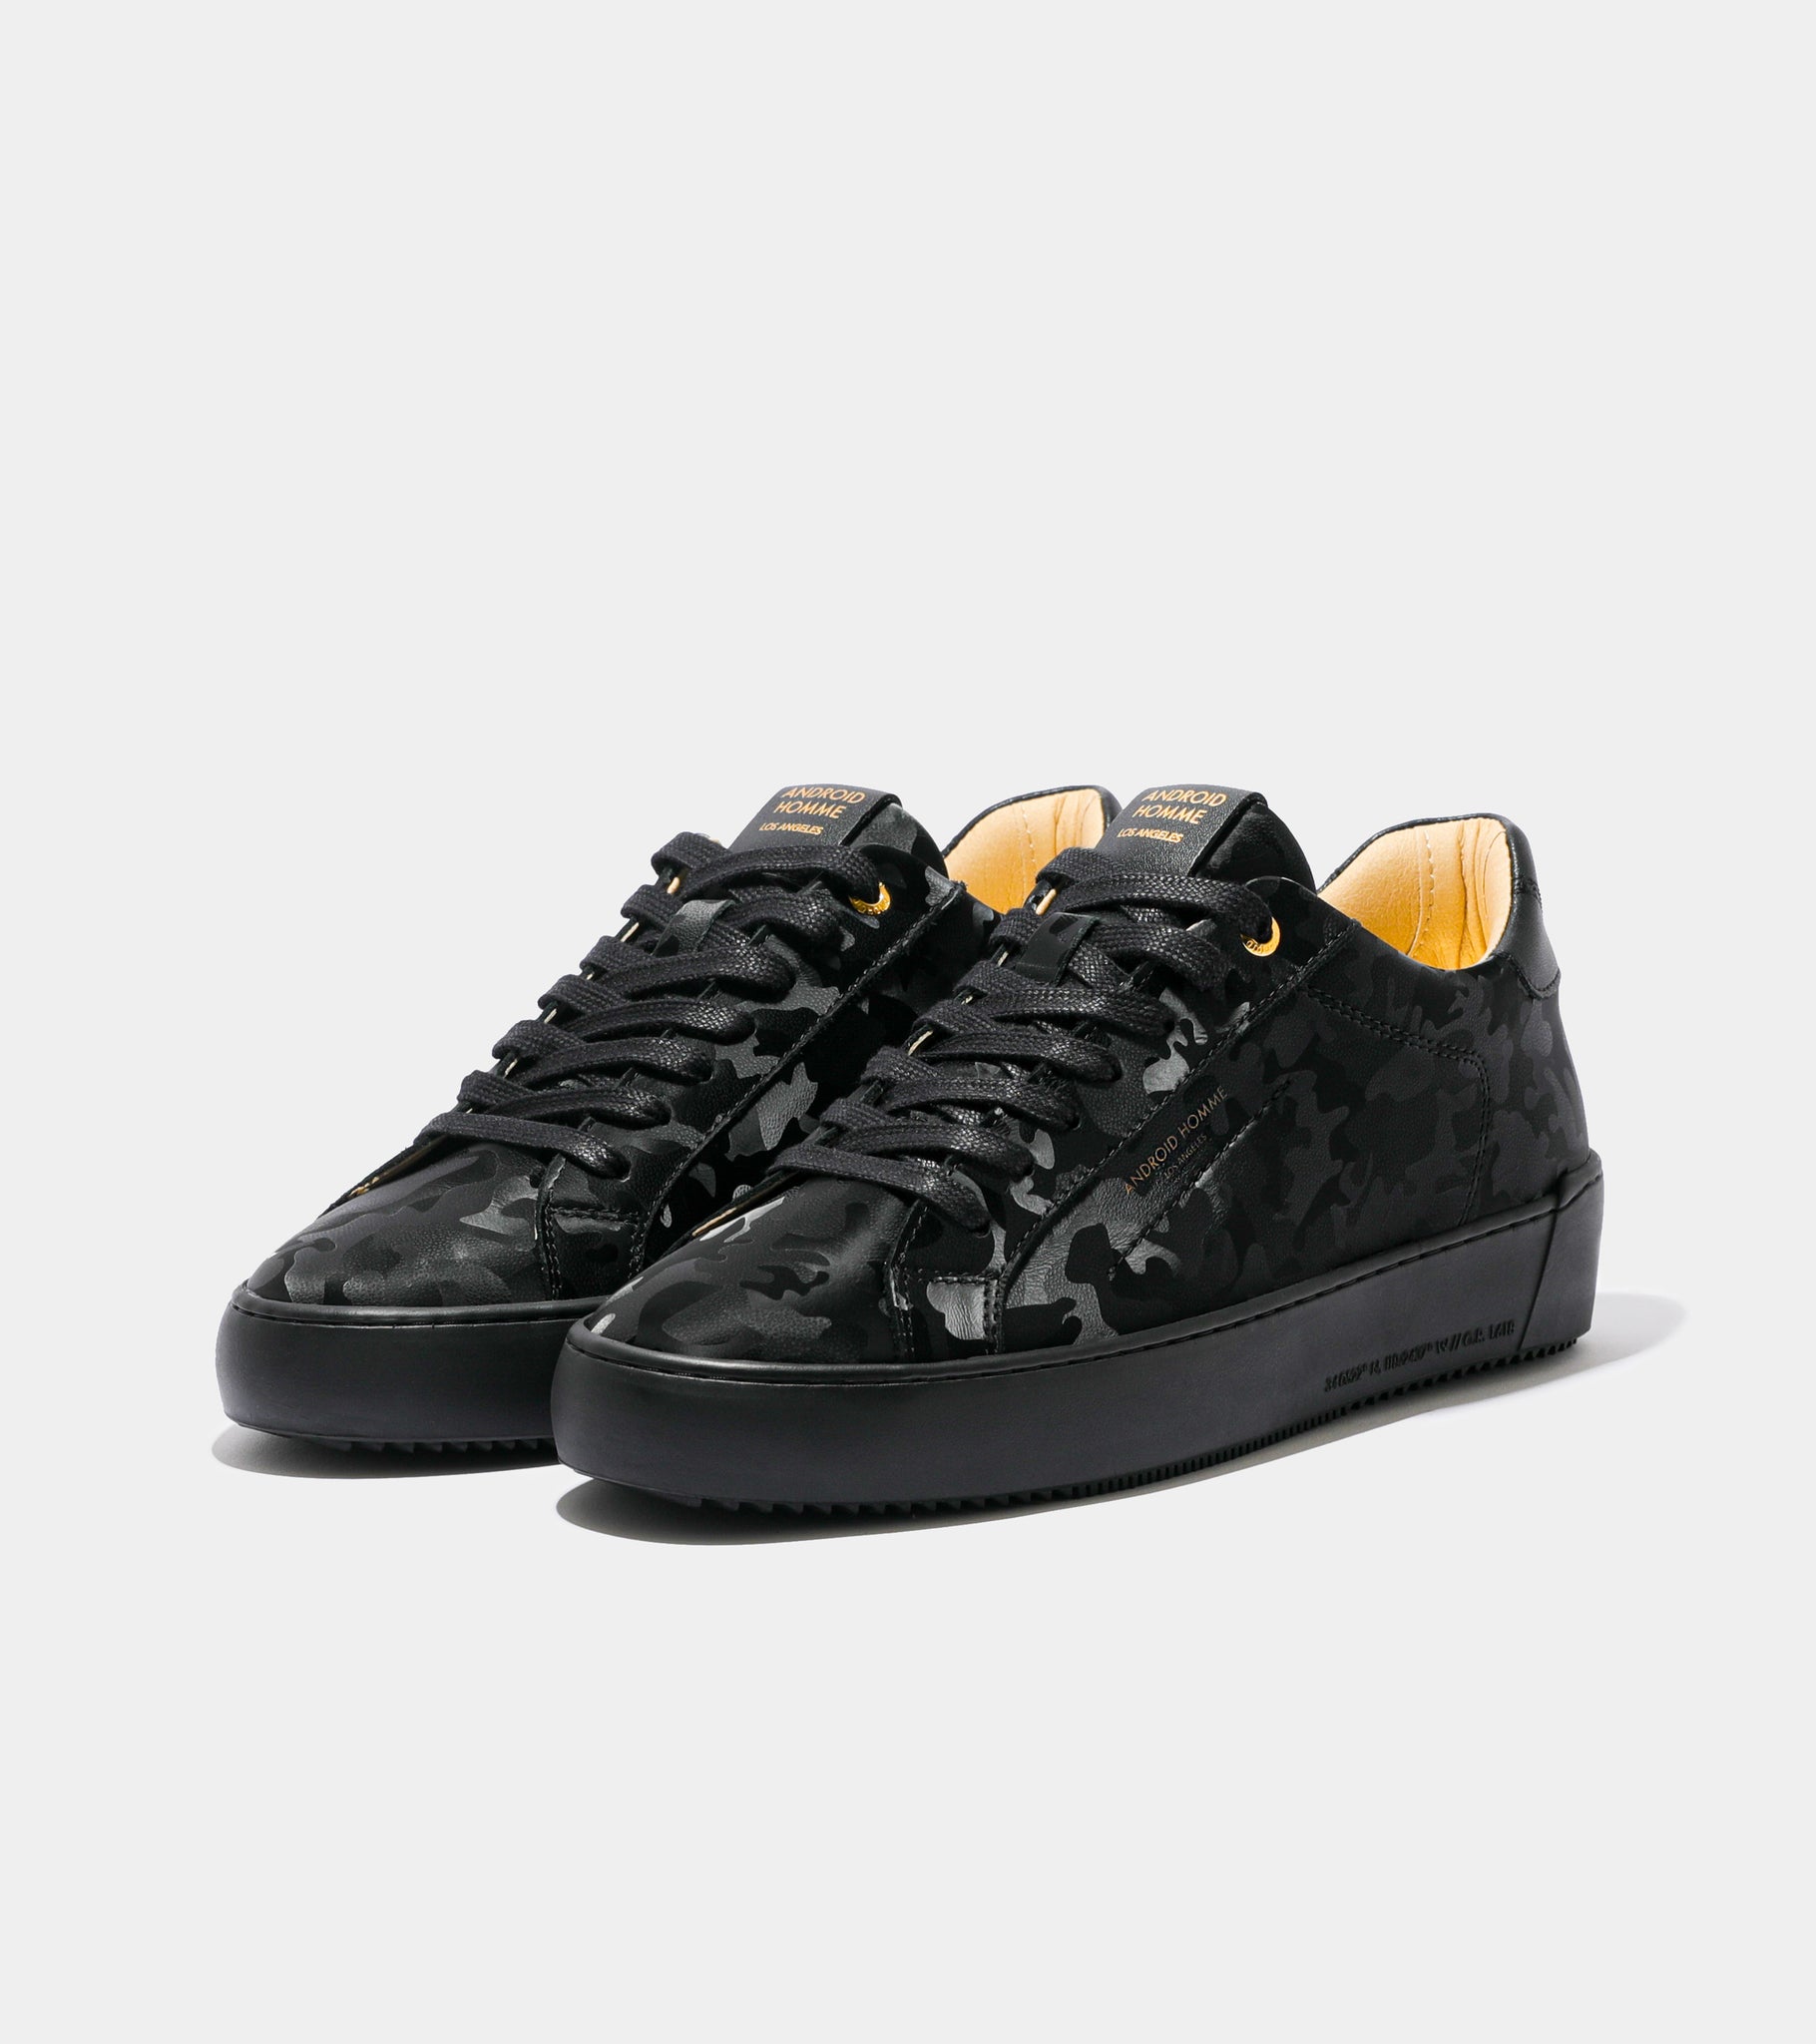 Ecom imagery of the Zuma All Over Black Leather Camo Android Homme Trainers.